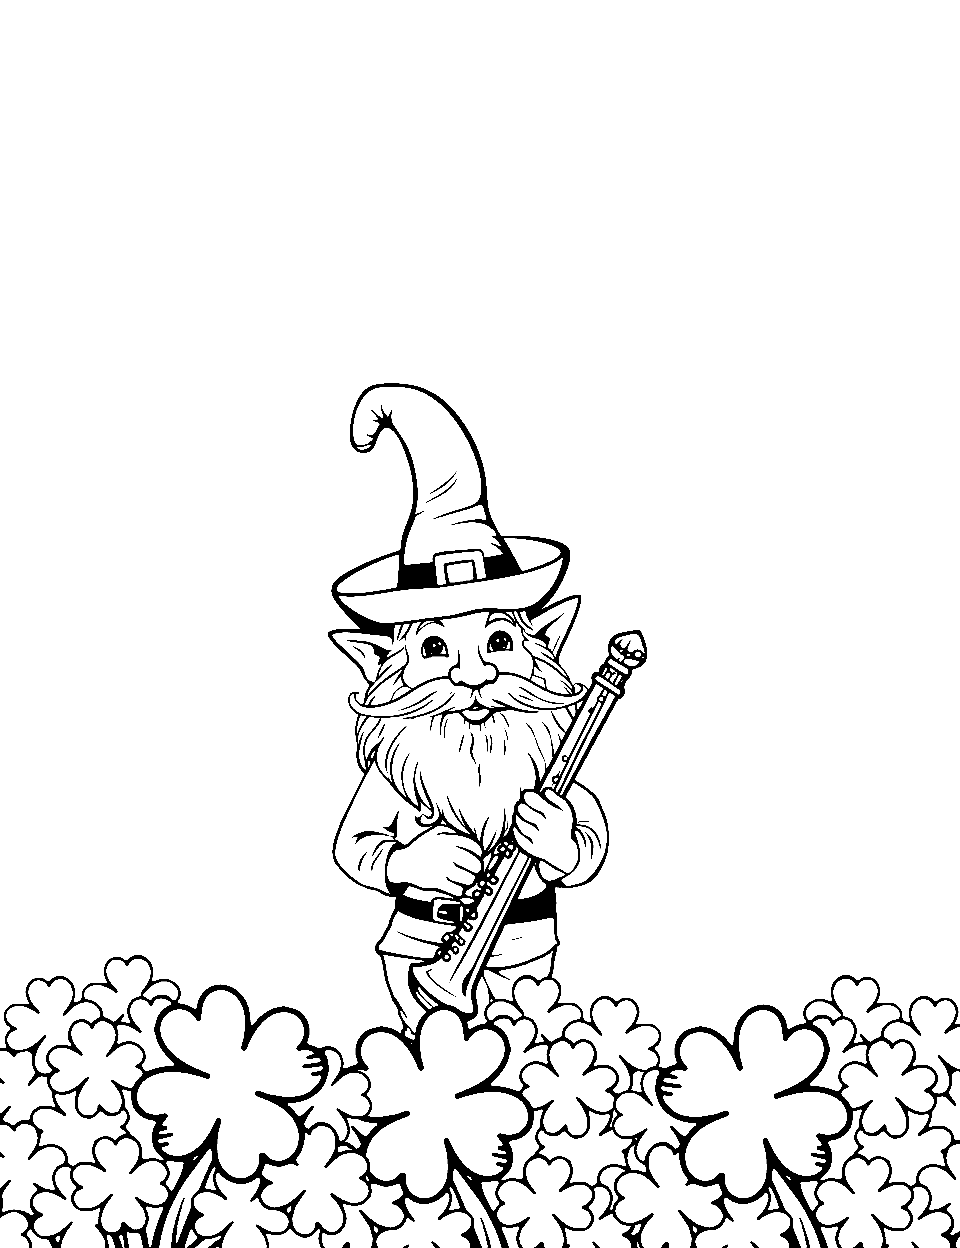 Jolly Gnome holding a Flute Coloring Page - A gnome holding a tune on his flute amidst clover patches.